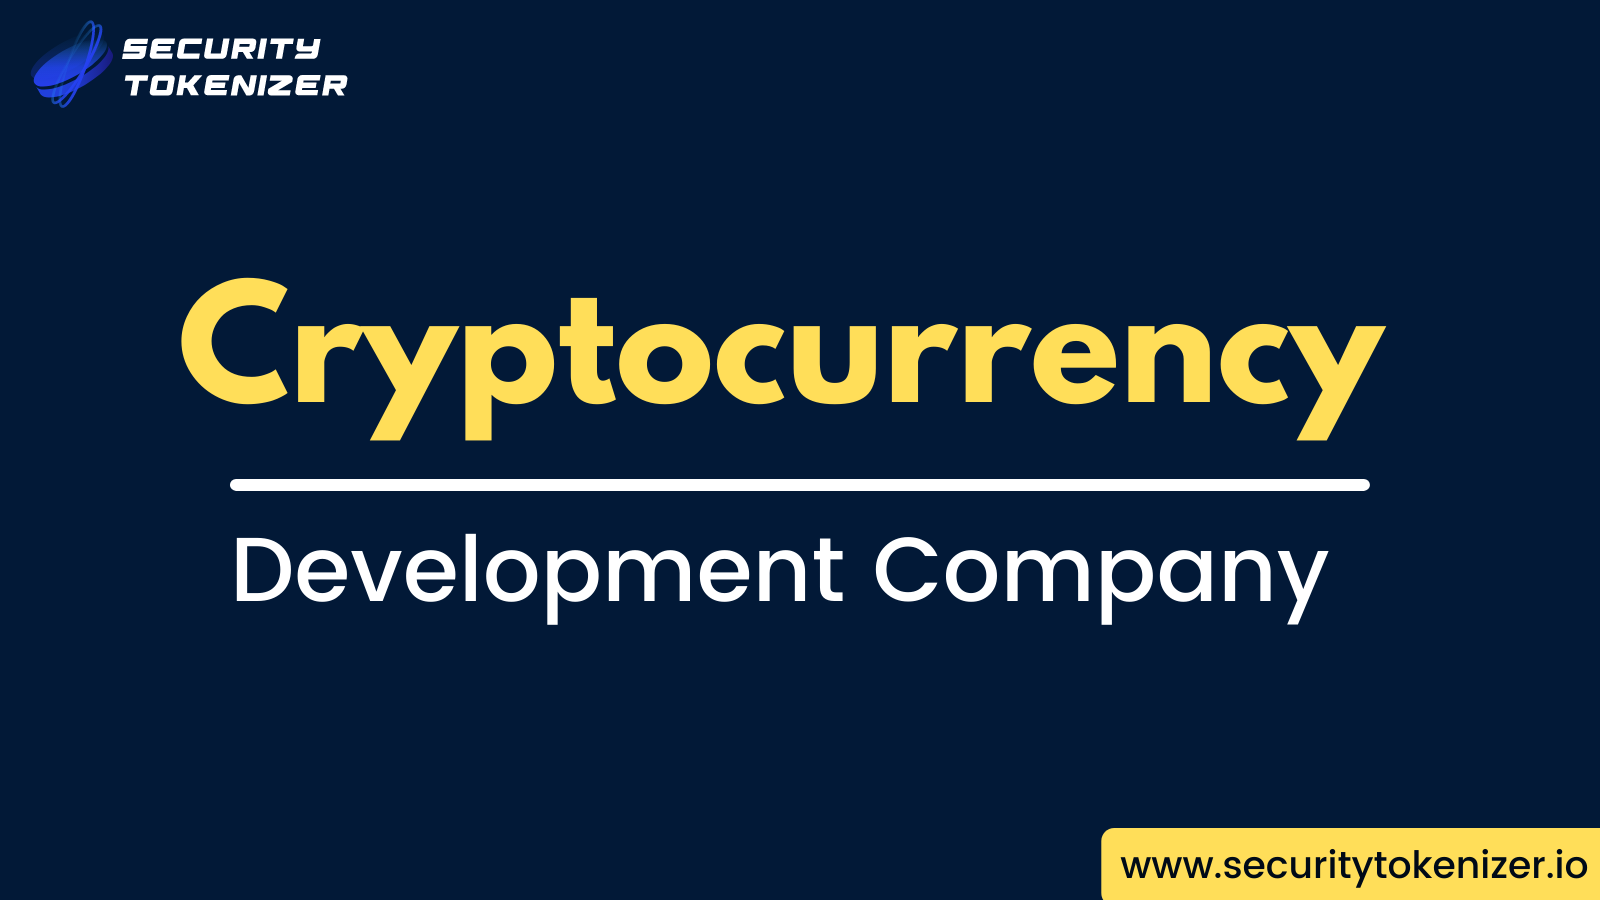 Article about Cryptocurrency Development Company